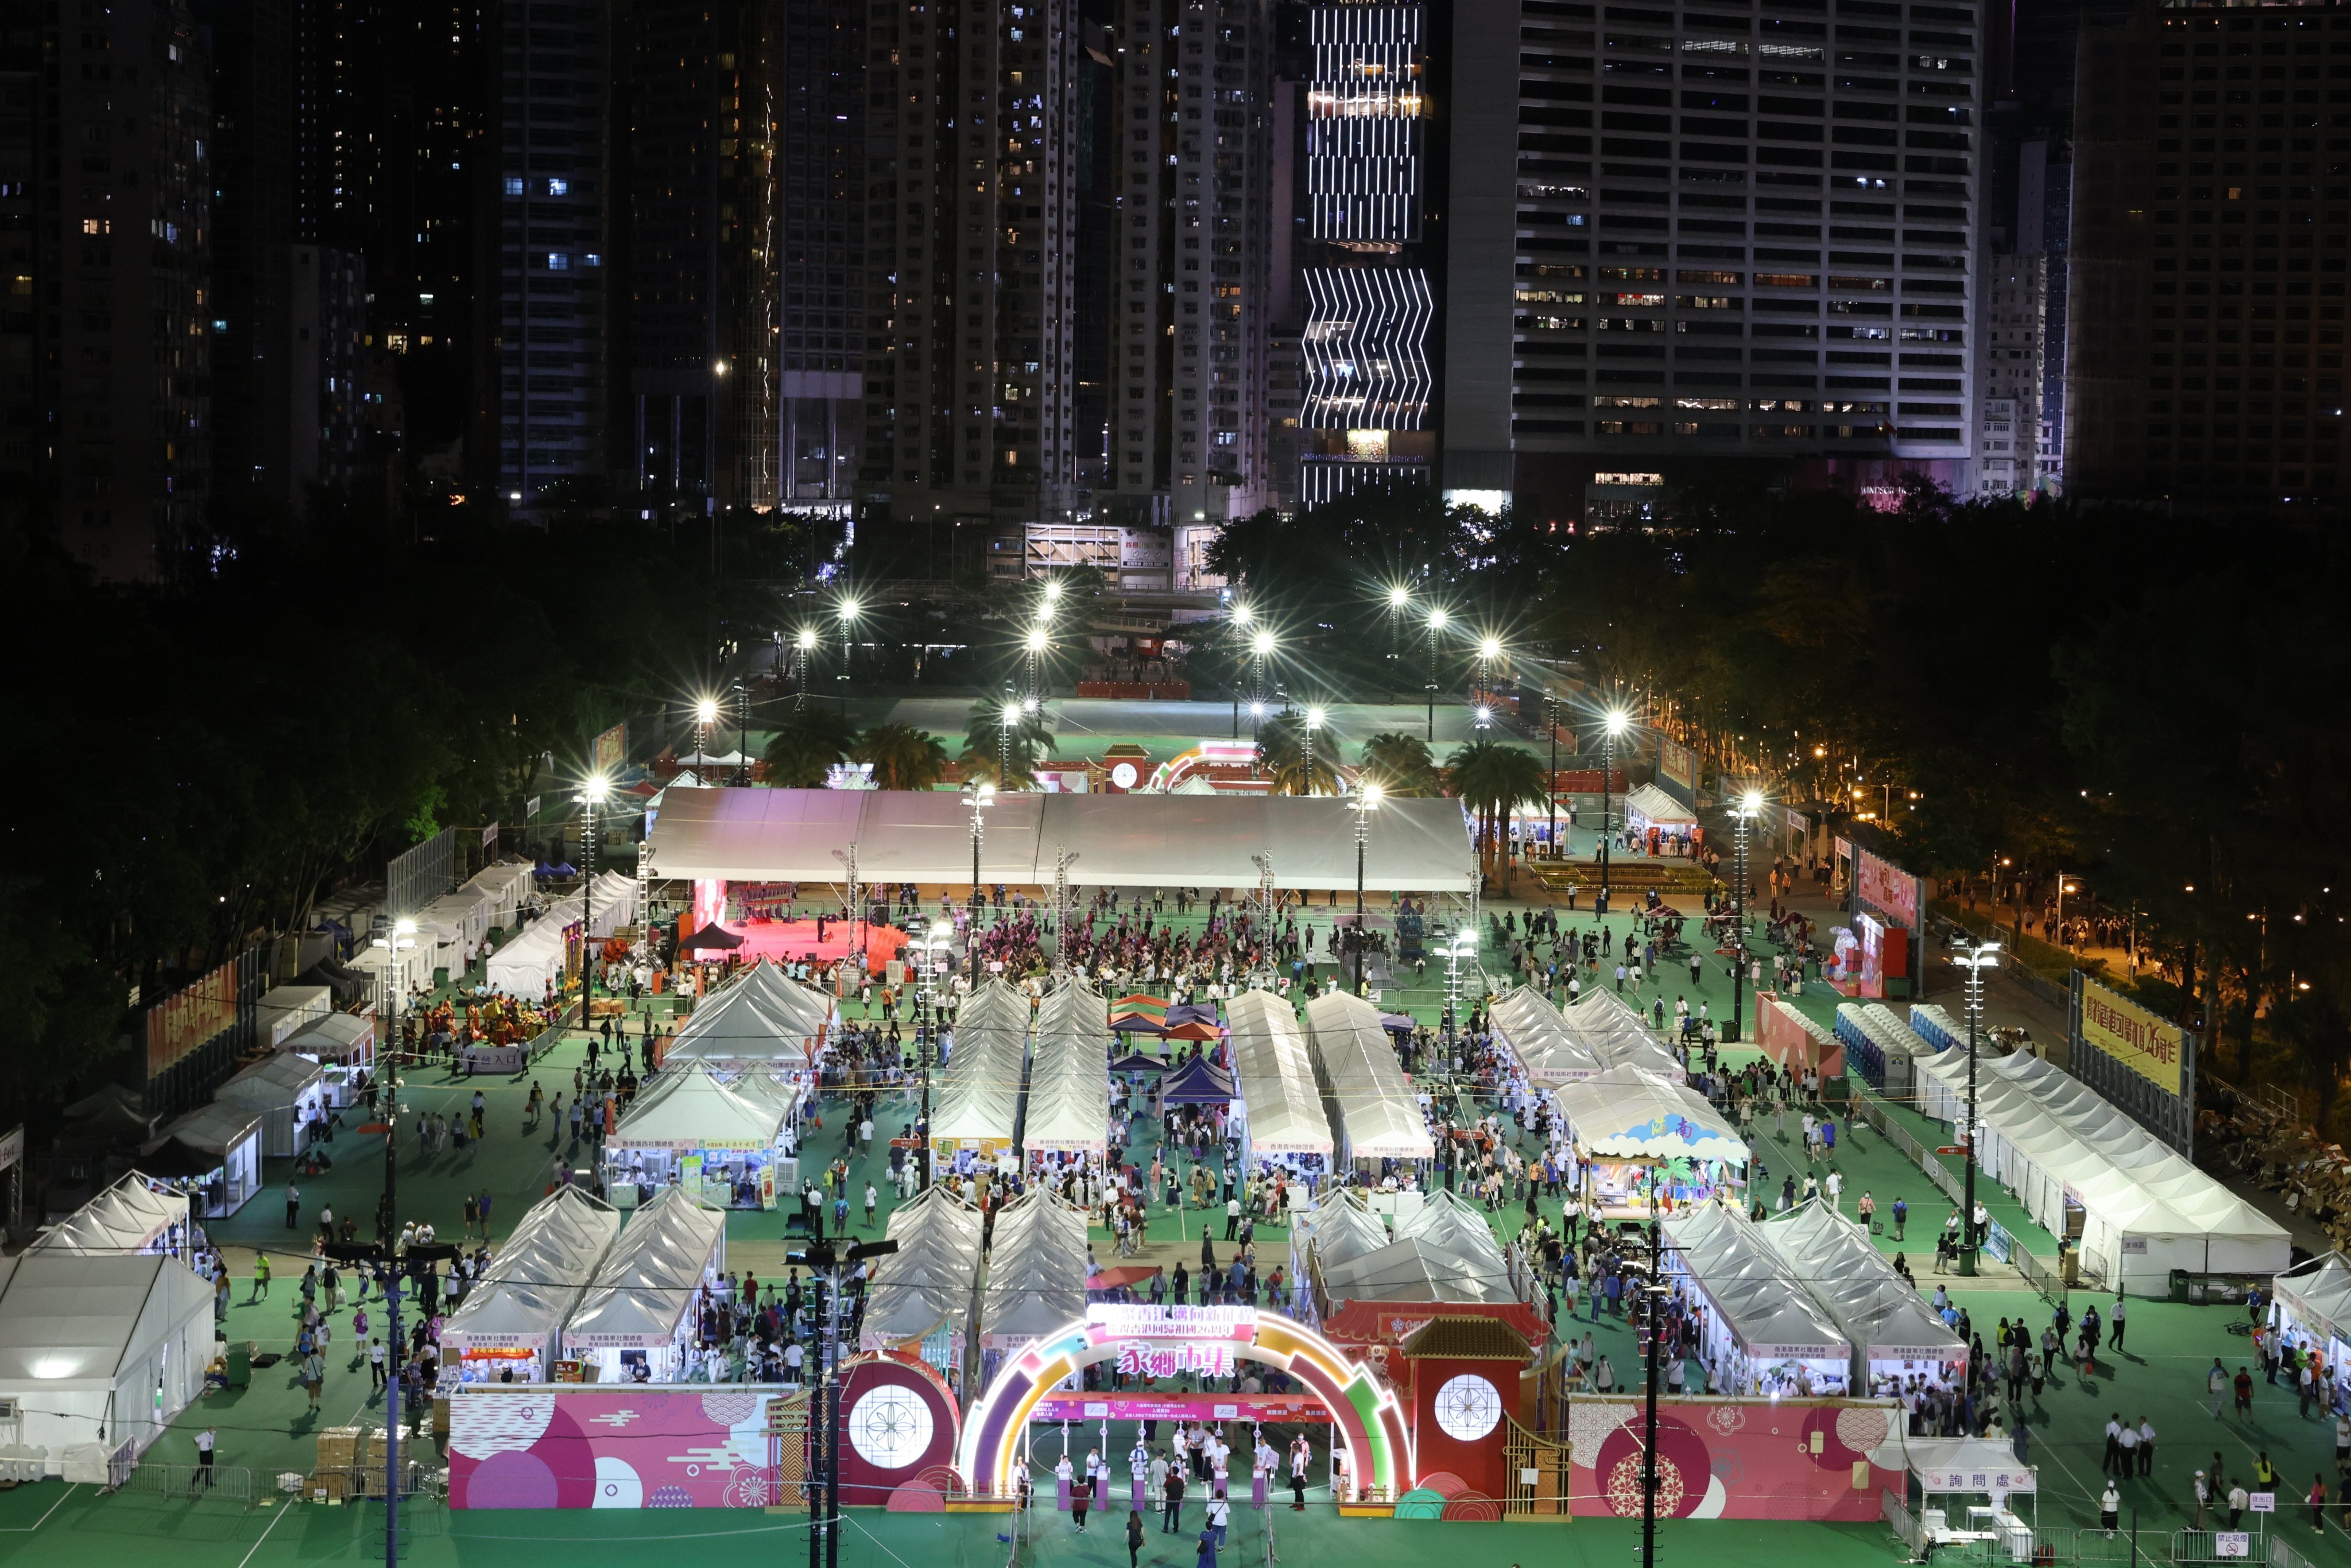 Last year’s “Hometown Market” in Victoria Park showcased 200 booths, performances and games from June 3 to 5. Photo: May Tse